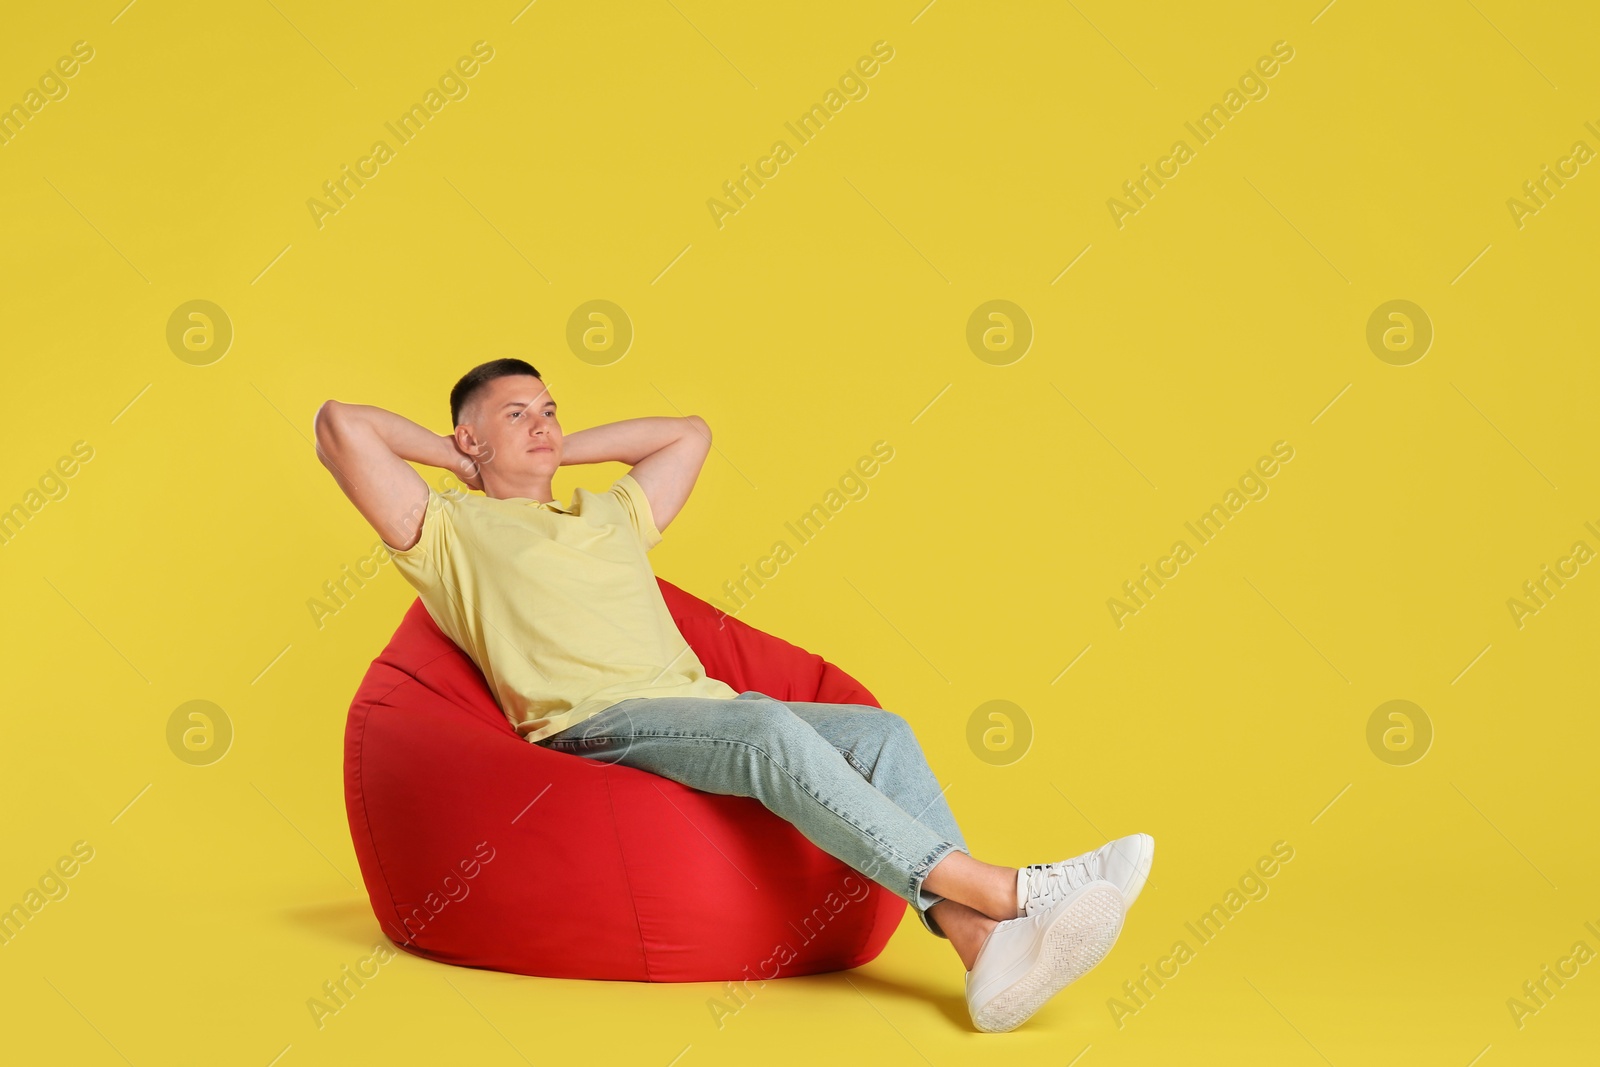 Photo of Handsome man resting on red bean bag chair against yellow background. Space for text